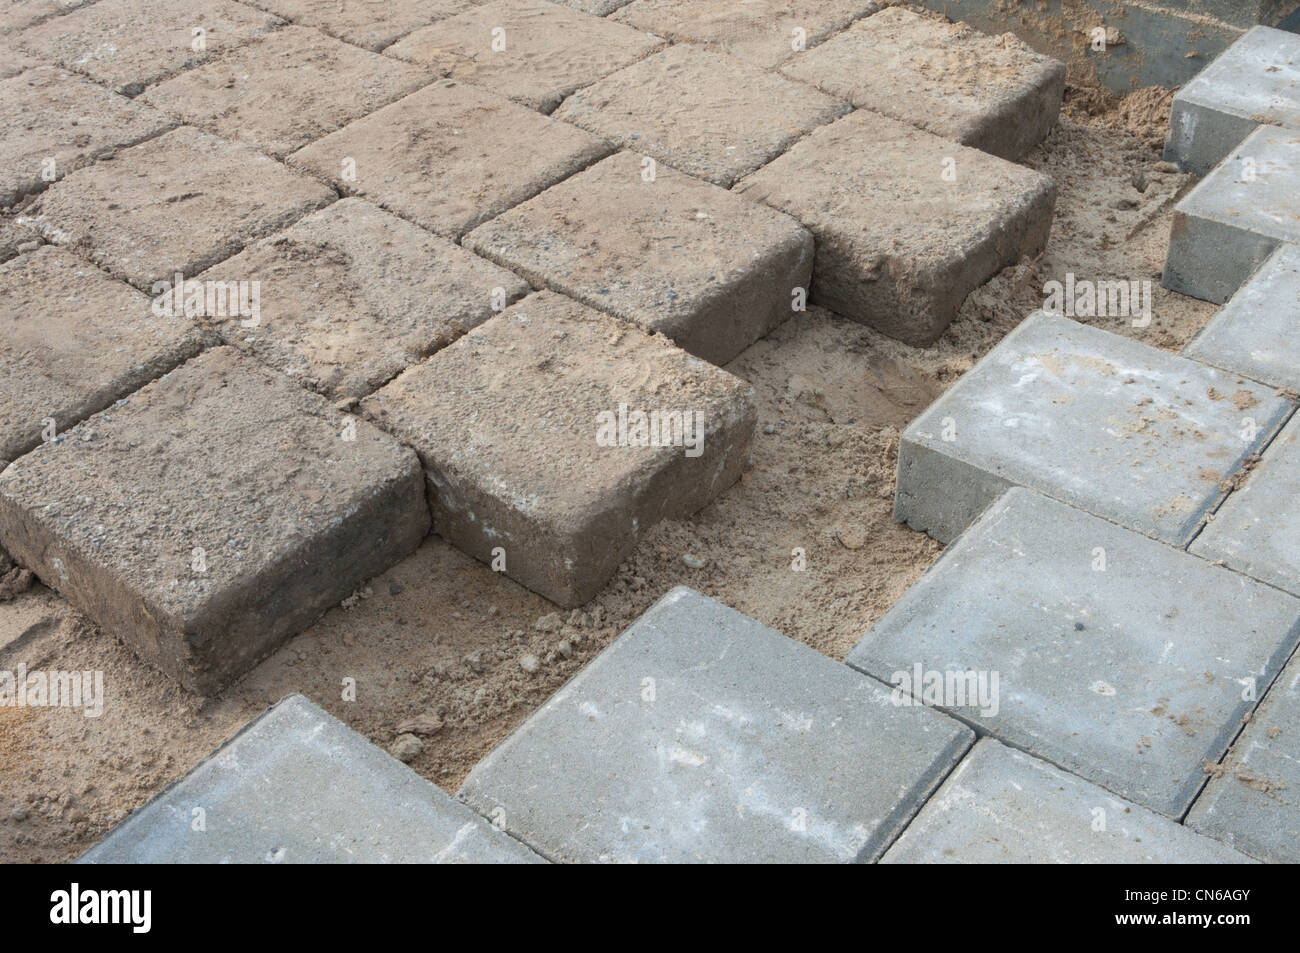 bricks coming together on a newly paved street Stock Photo